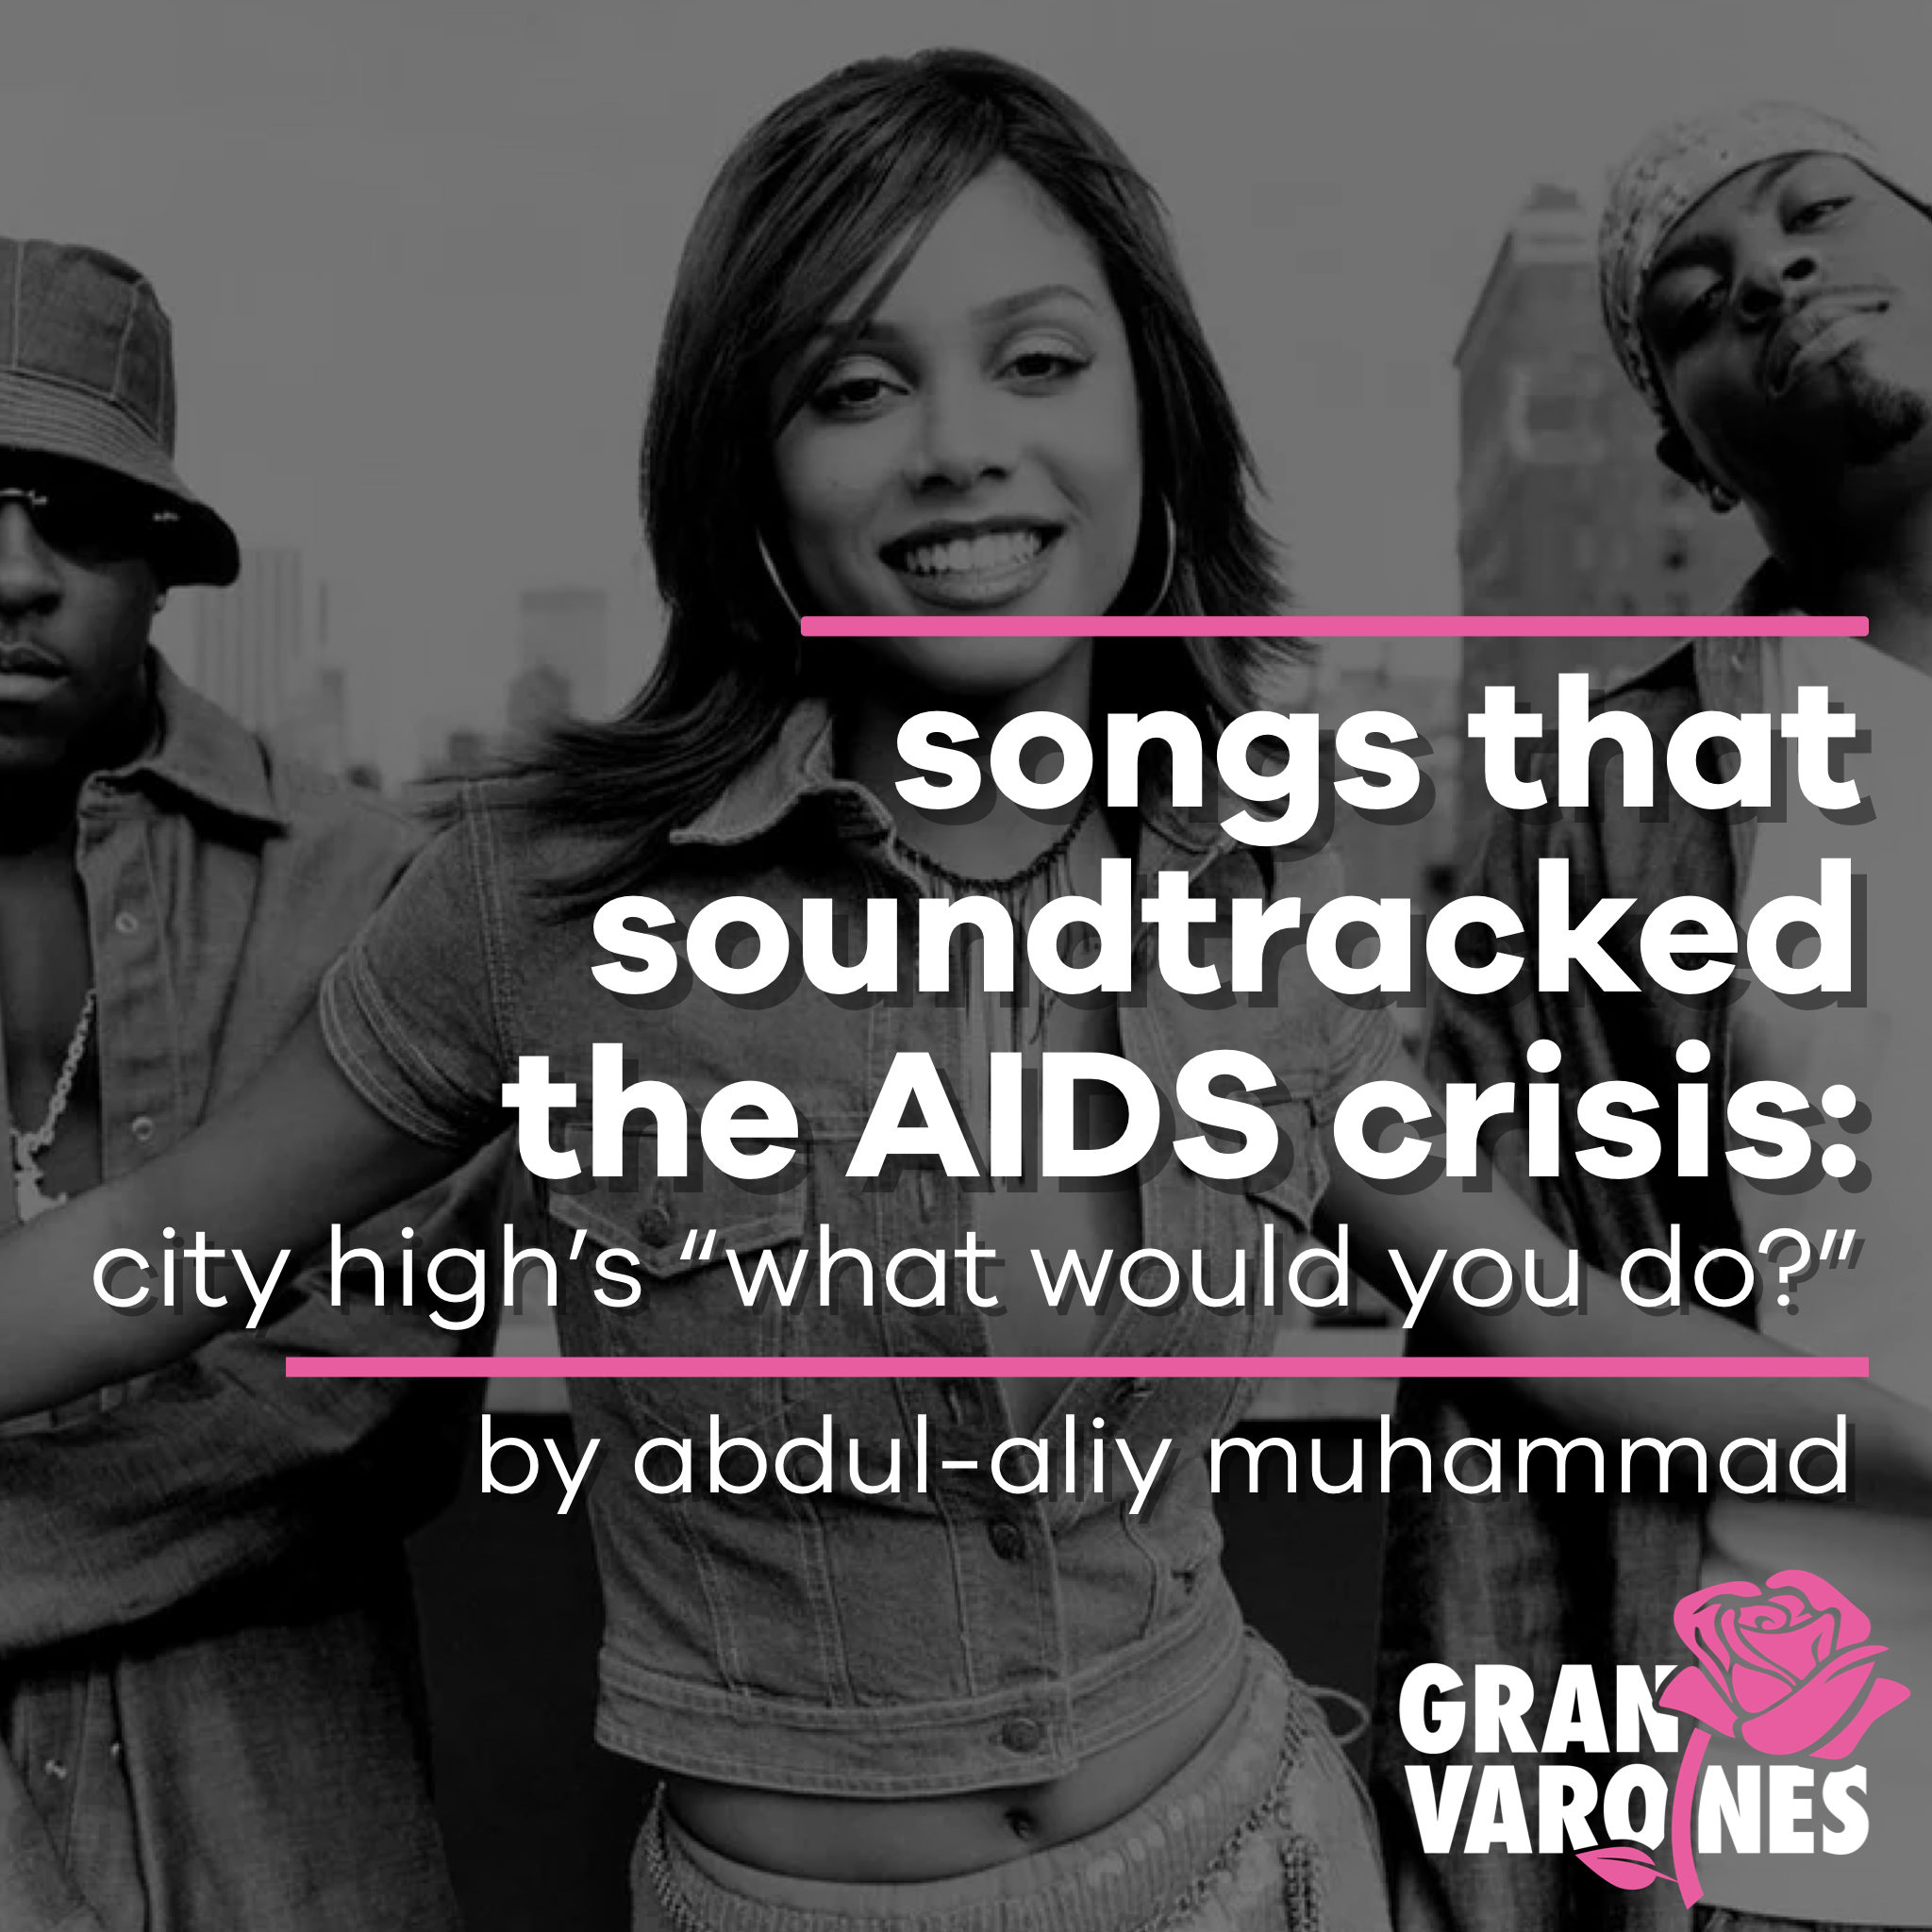 Songs That Soundtracked The AIDS Crisis: City High’s “What Would You Do?”